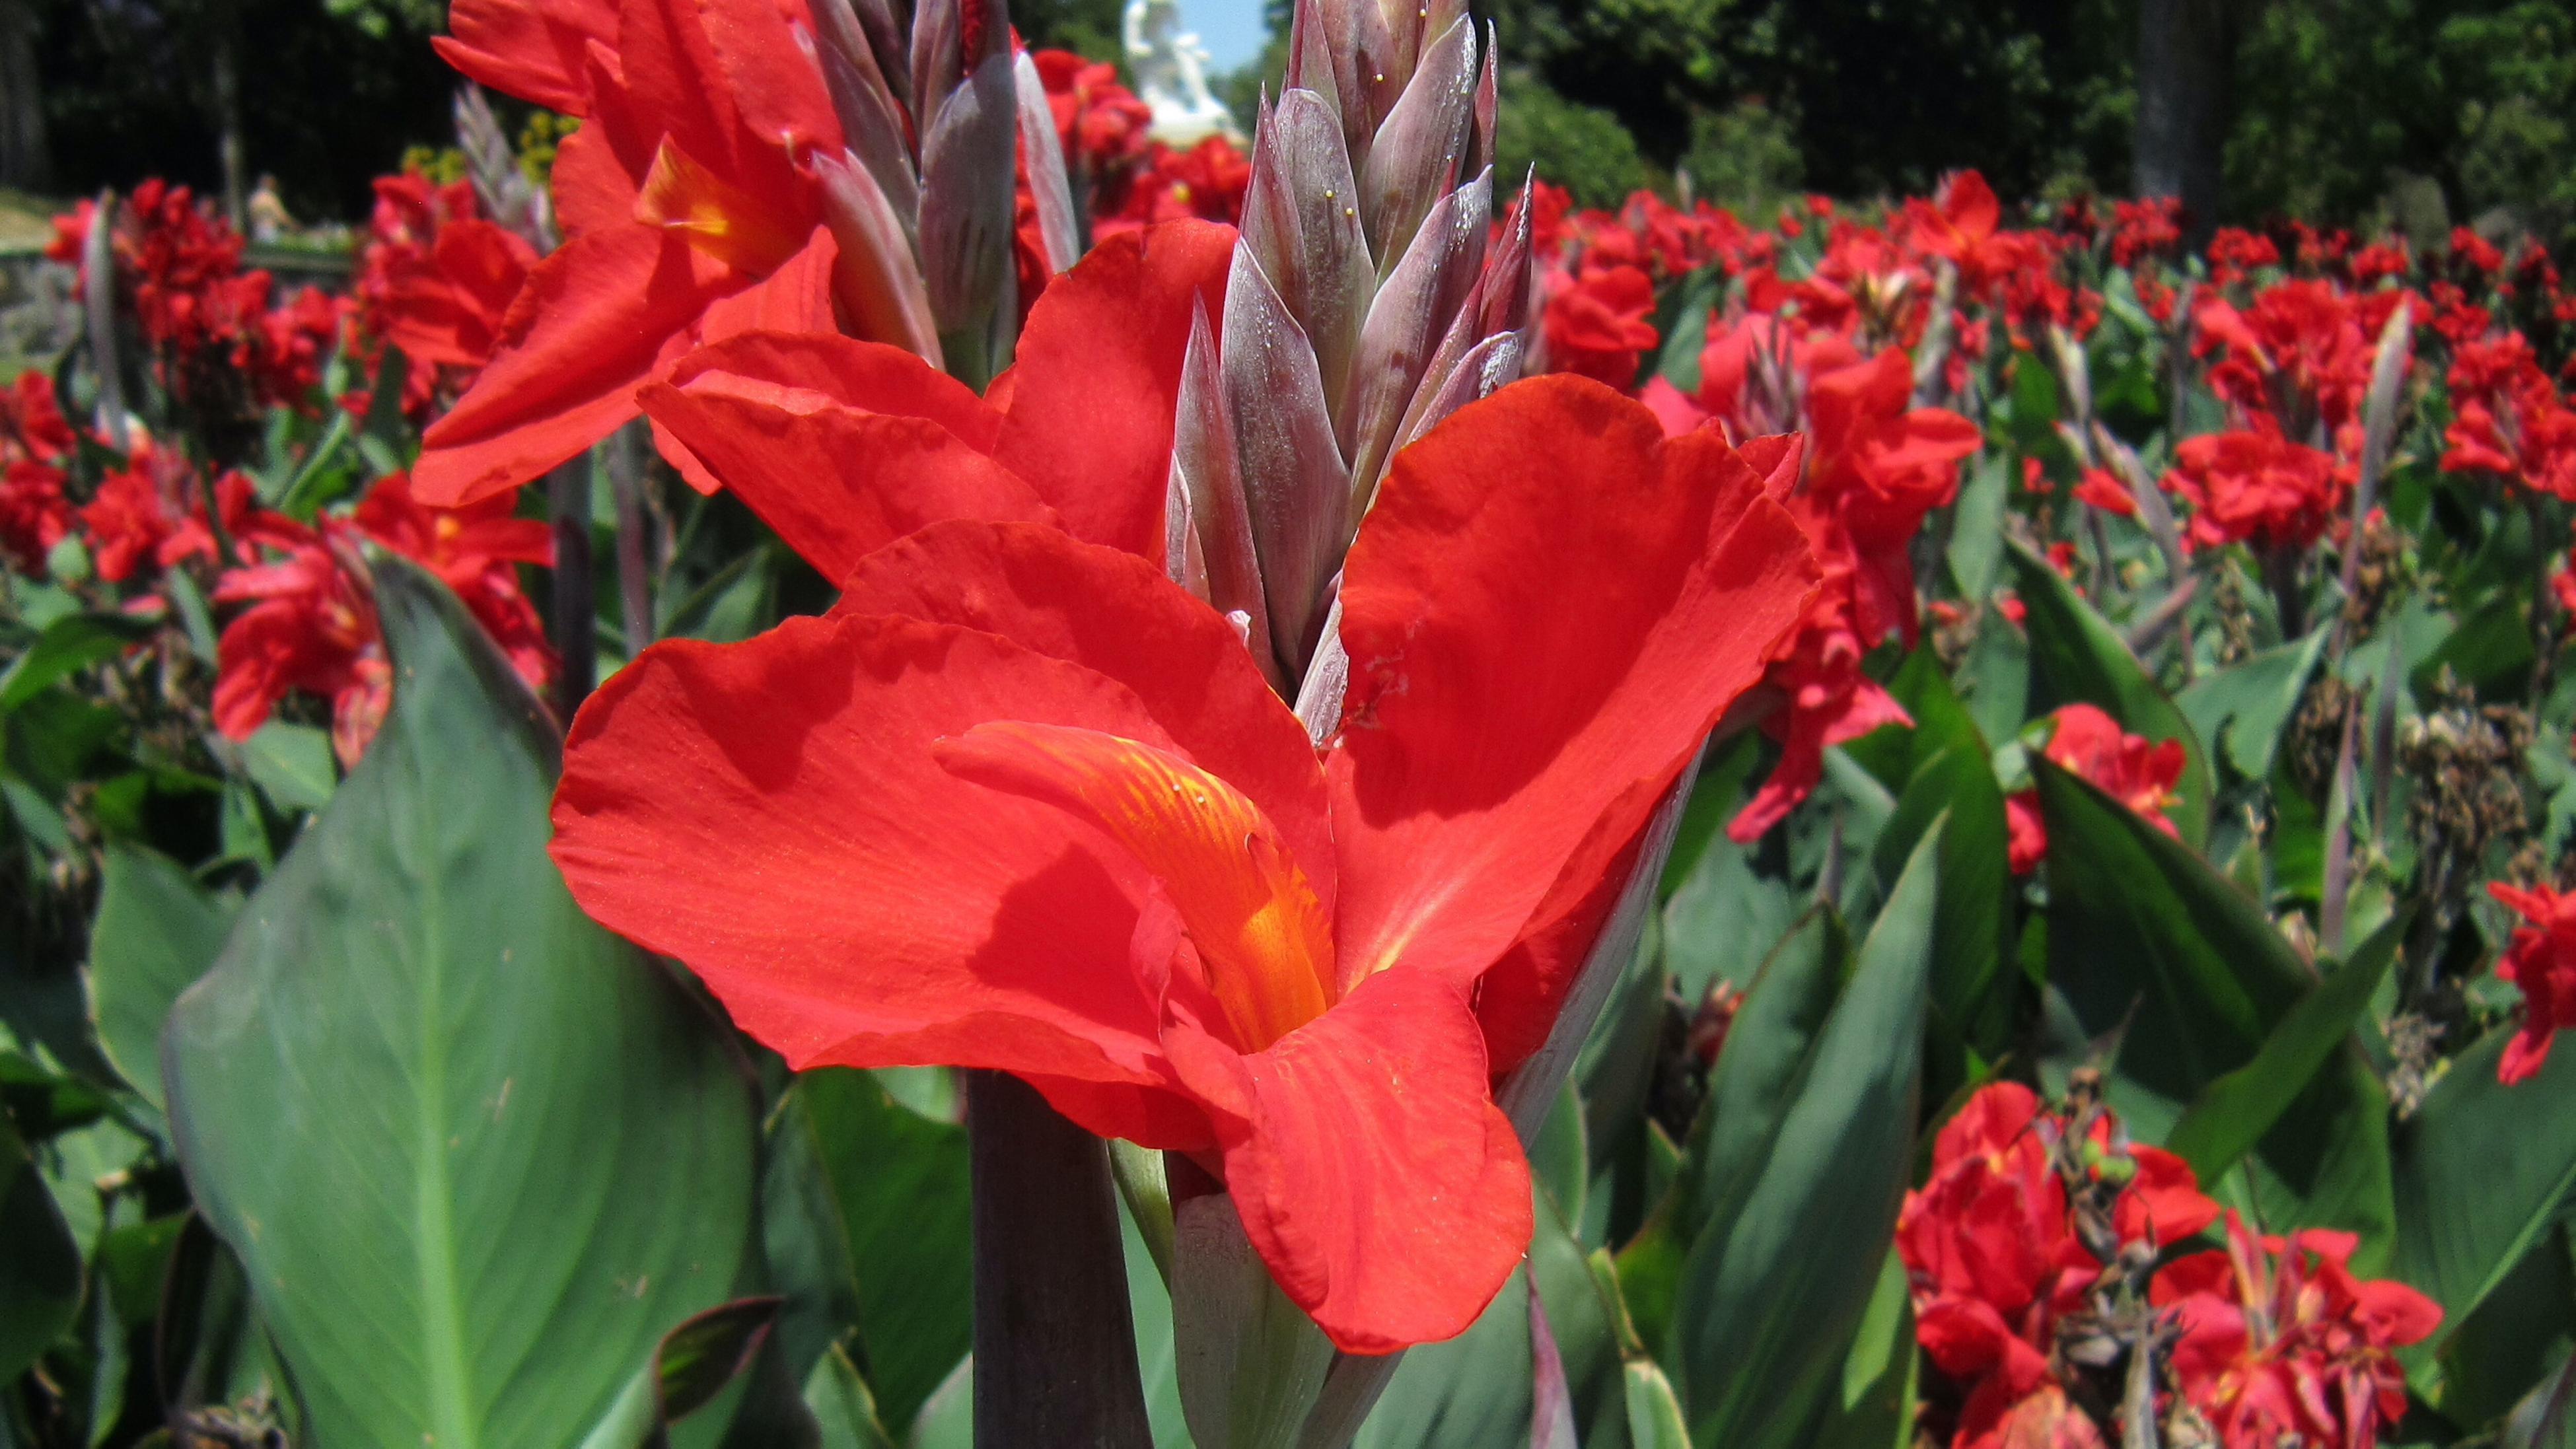 How To Grow And Care For A Canna Lily - Bunnings New Zealand